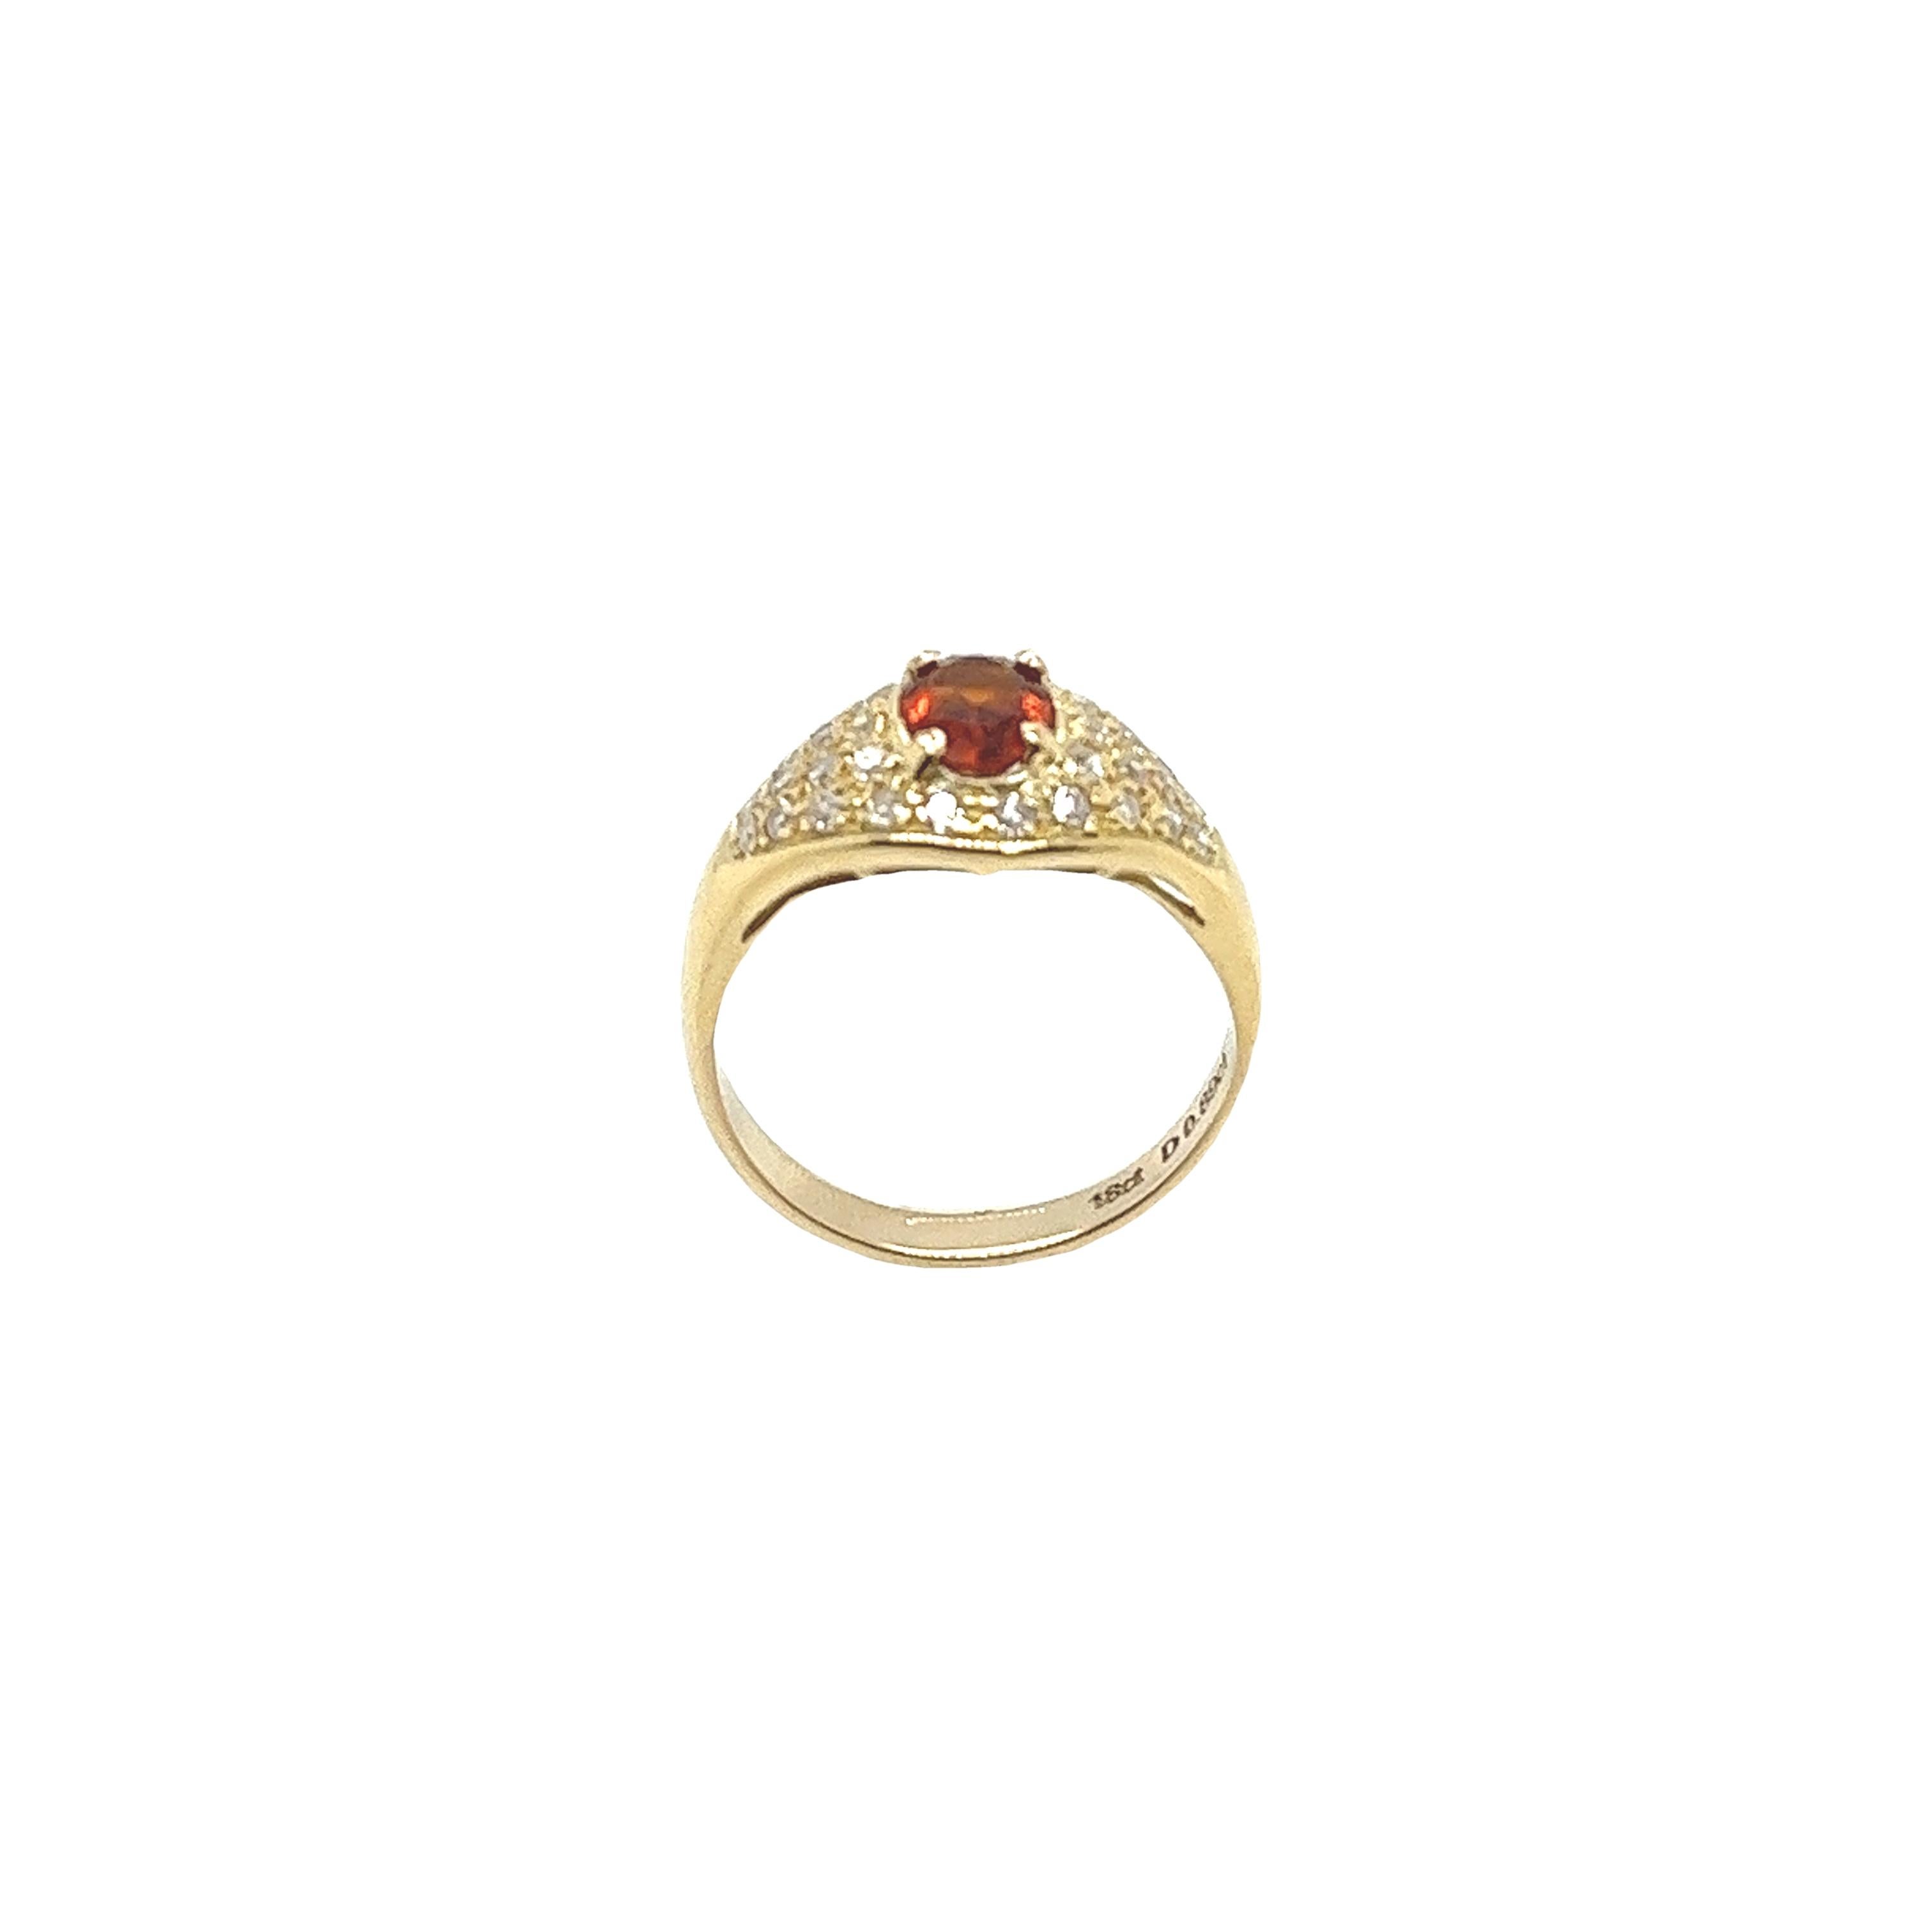 This gorgeous oval citrine ring set in 18ct yellow gold setting with 0.35 natural round brilliant cut diamonds. This is a unique and eye-catching ring.
Total Diamond Weight: 0.35ct
Diamond Colour: H
Diamond Clarity: VS1
Total Weight: 4.8g
Ring Size: